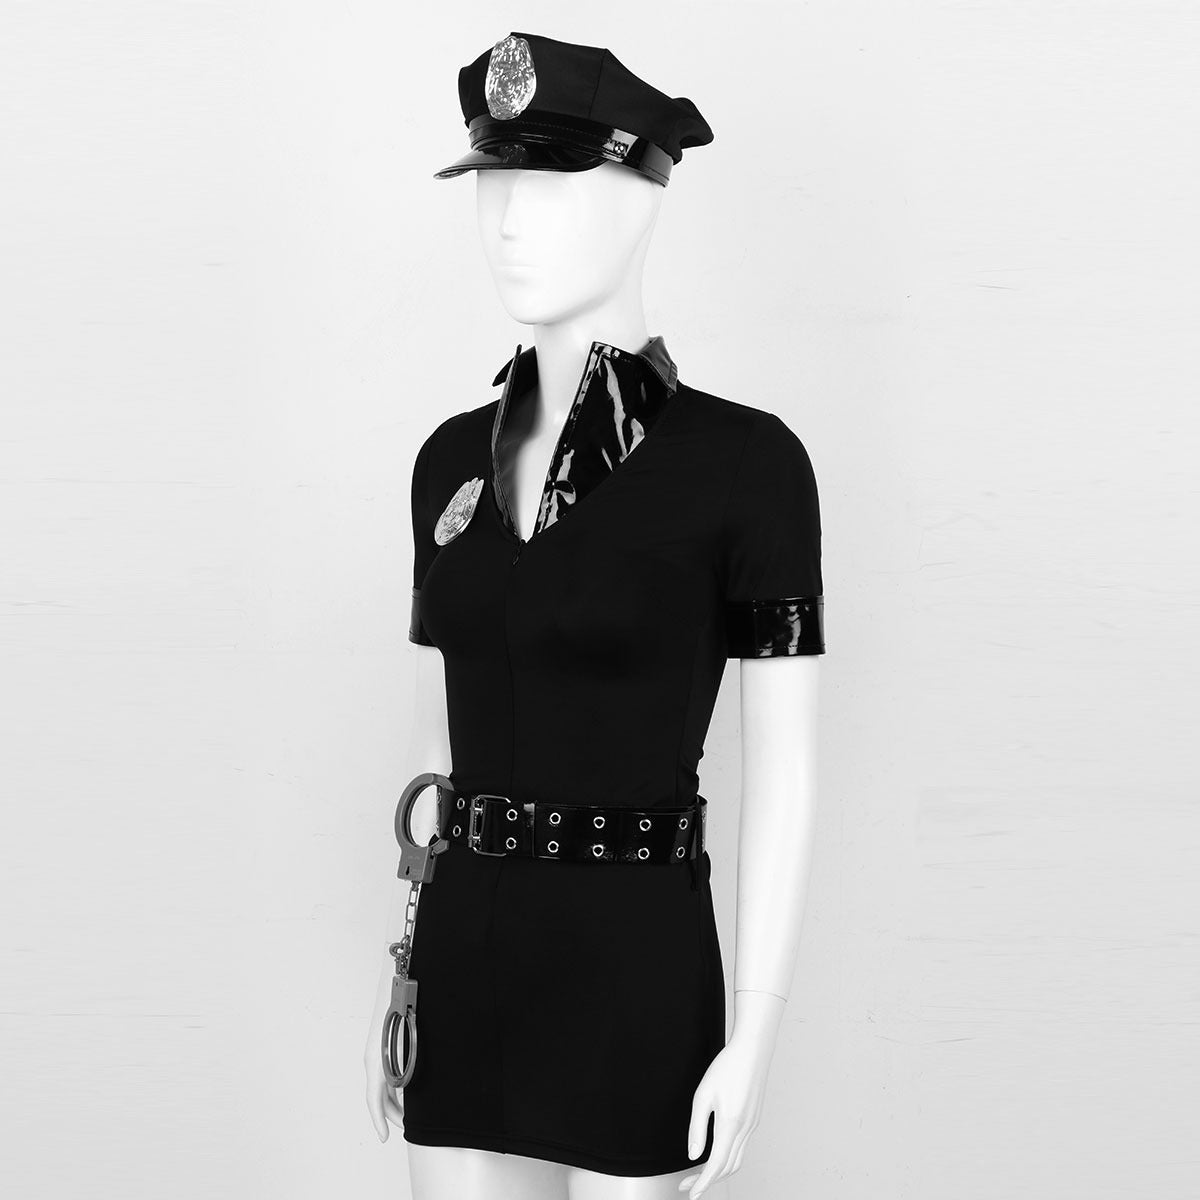 Police Officer Cosplay Women's Costume / Halloween Costume With Hat And Cuffs / Bodycon Mini Dress - HARD'N'HEAVY